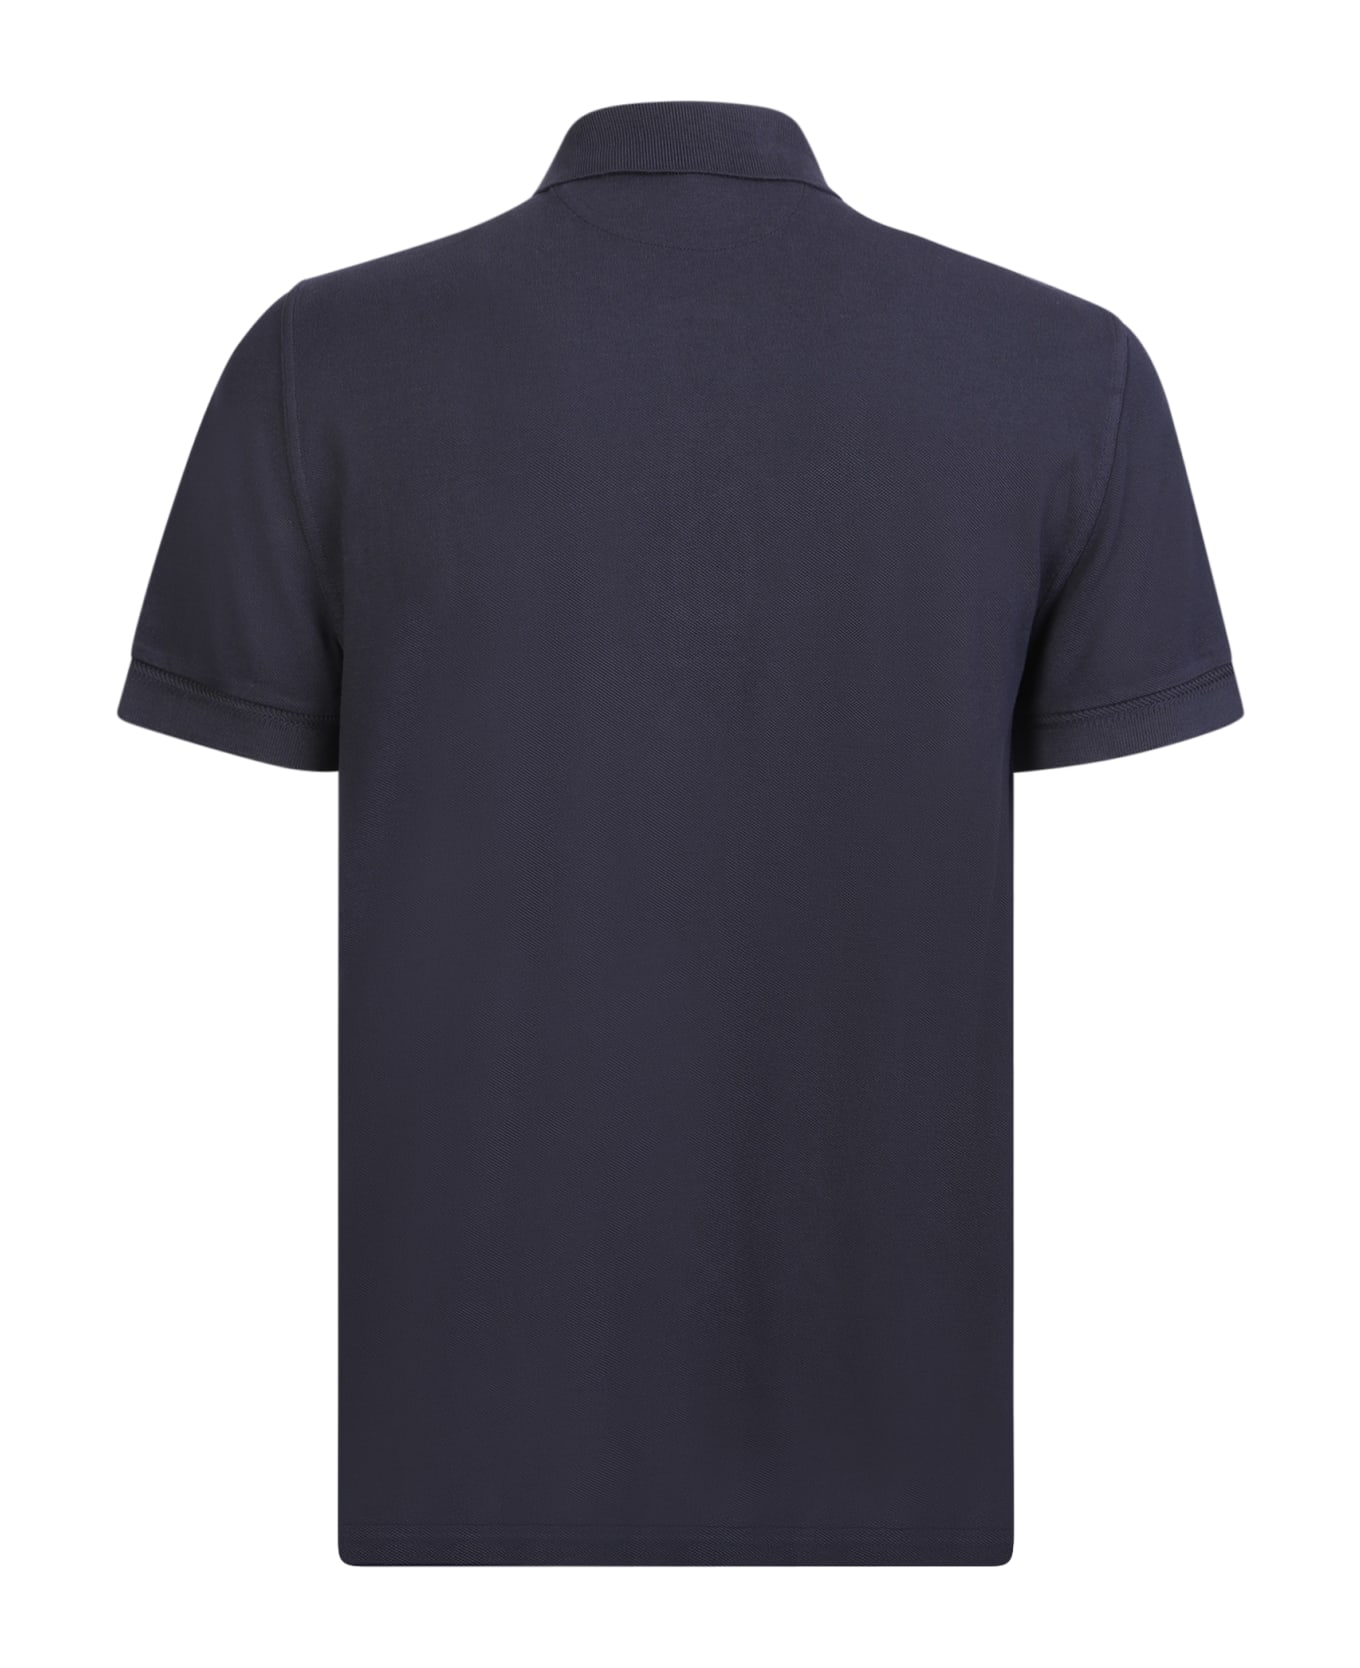 Tom Ford Blue Polo Shirt - MIDNIGHT BLUE ポロシャツ